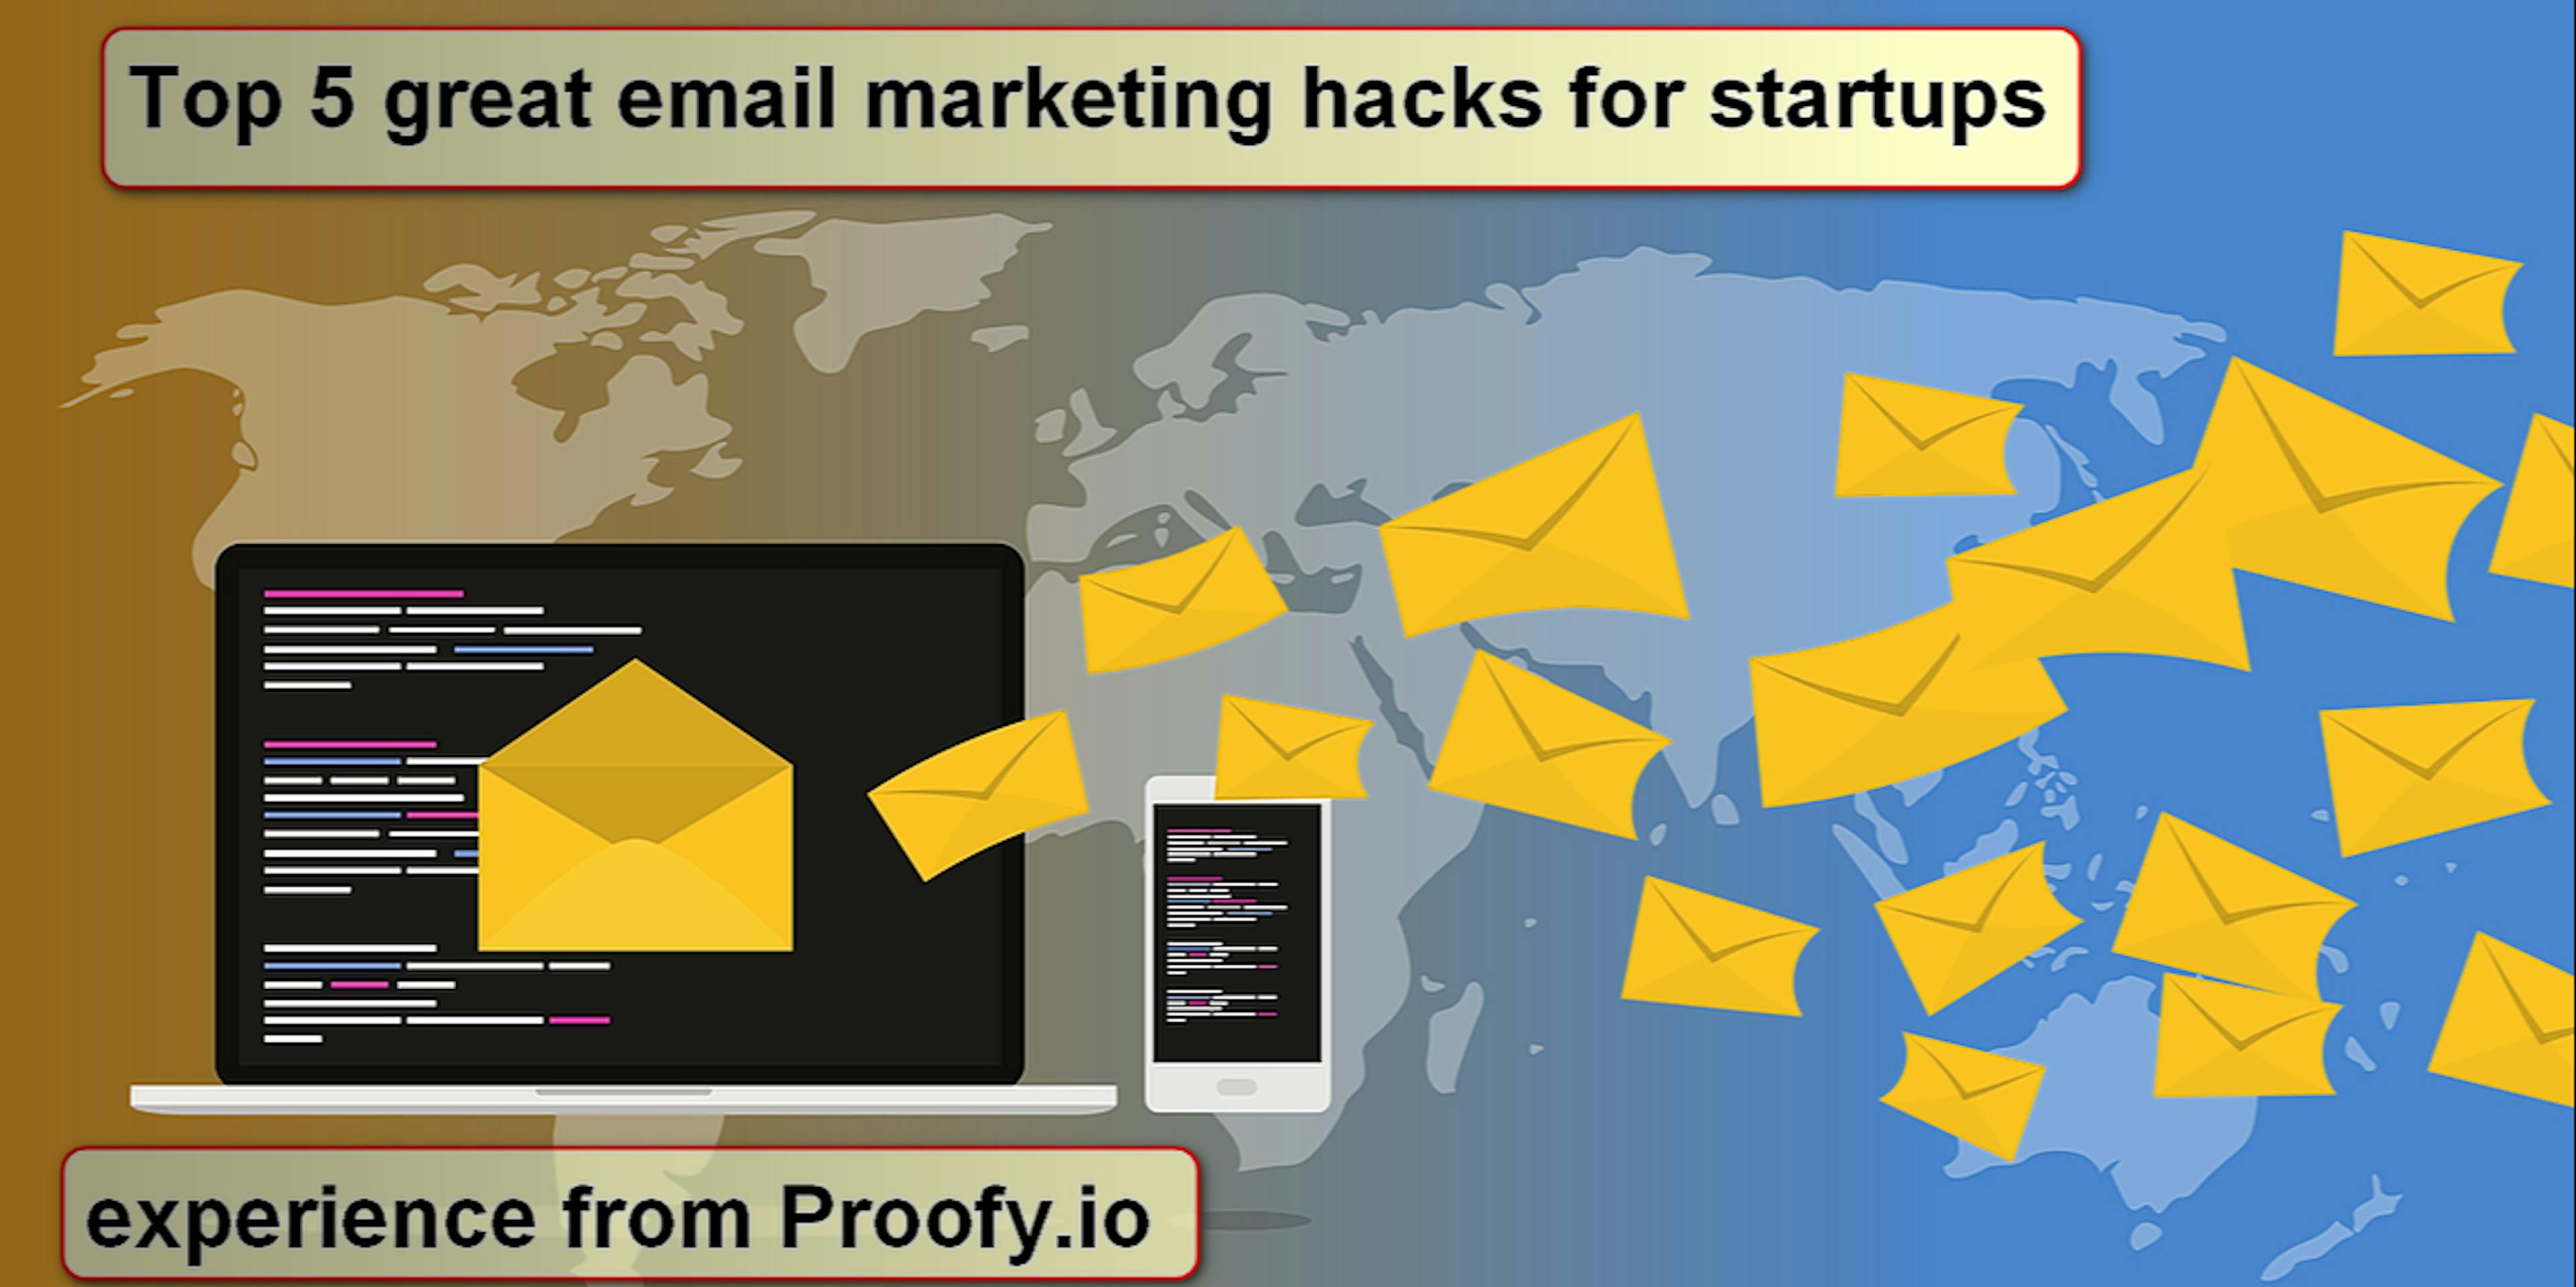 /new-hacks-on-the-email-marketing-for-startups-u0223zwx feature image